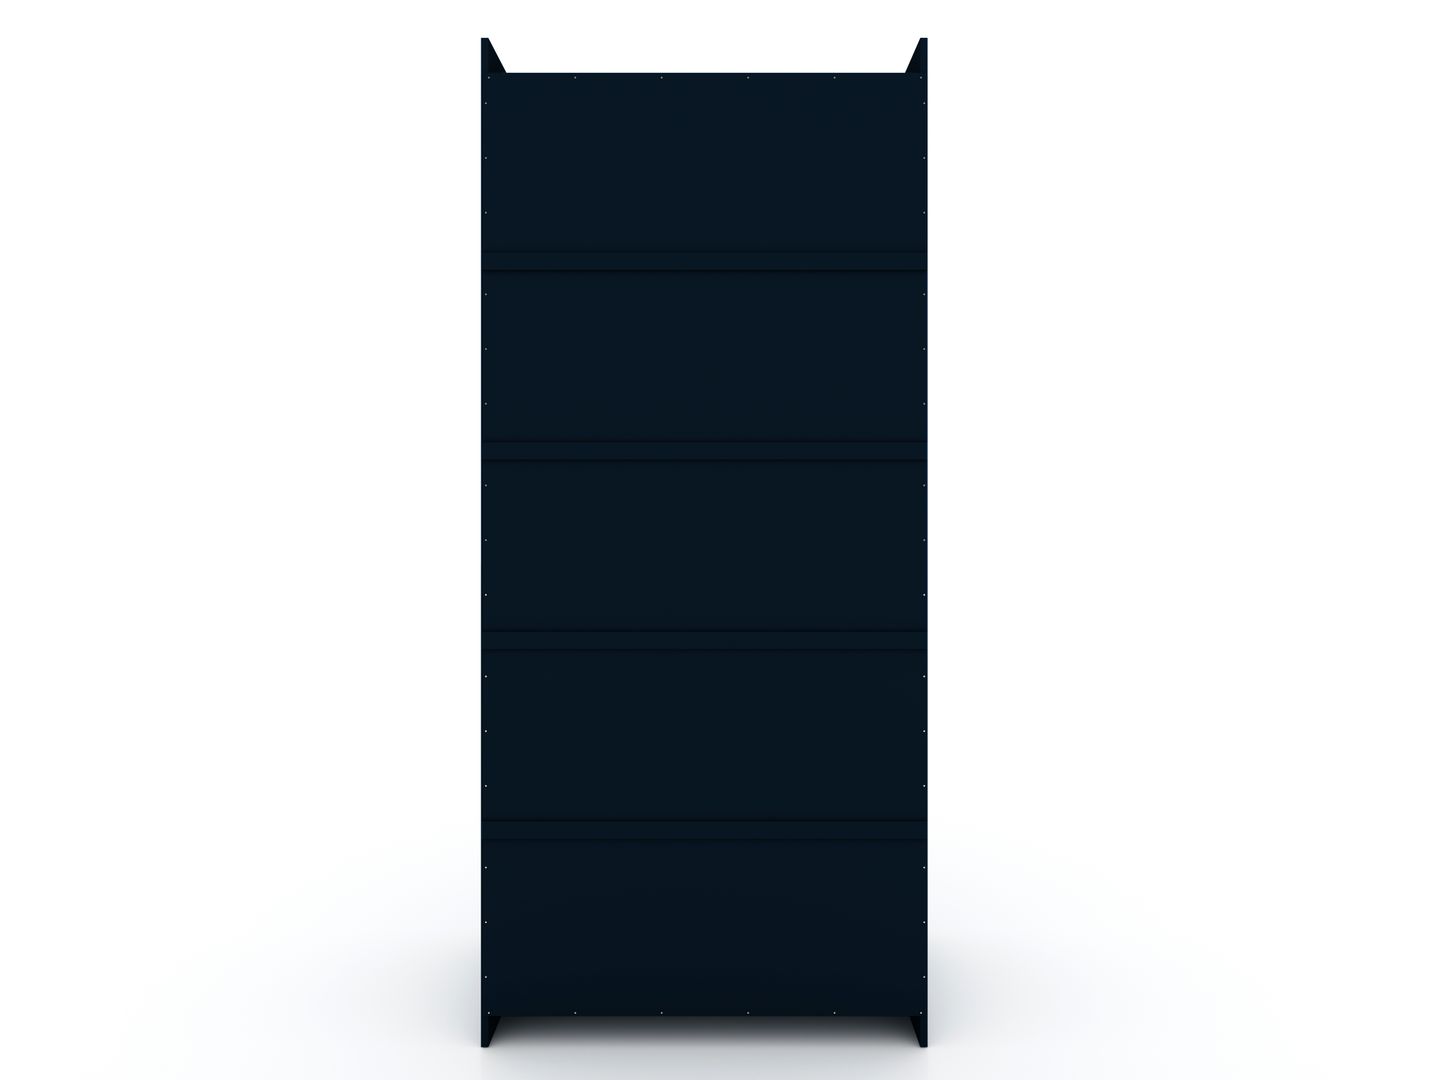 Manhattan Comfort Mulberry Open 1 Sectional Modern Armoire Wardrobe Closet with 2 Drawers in Tatiana Midnight Blue